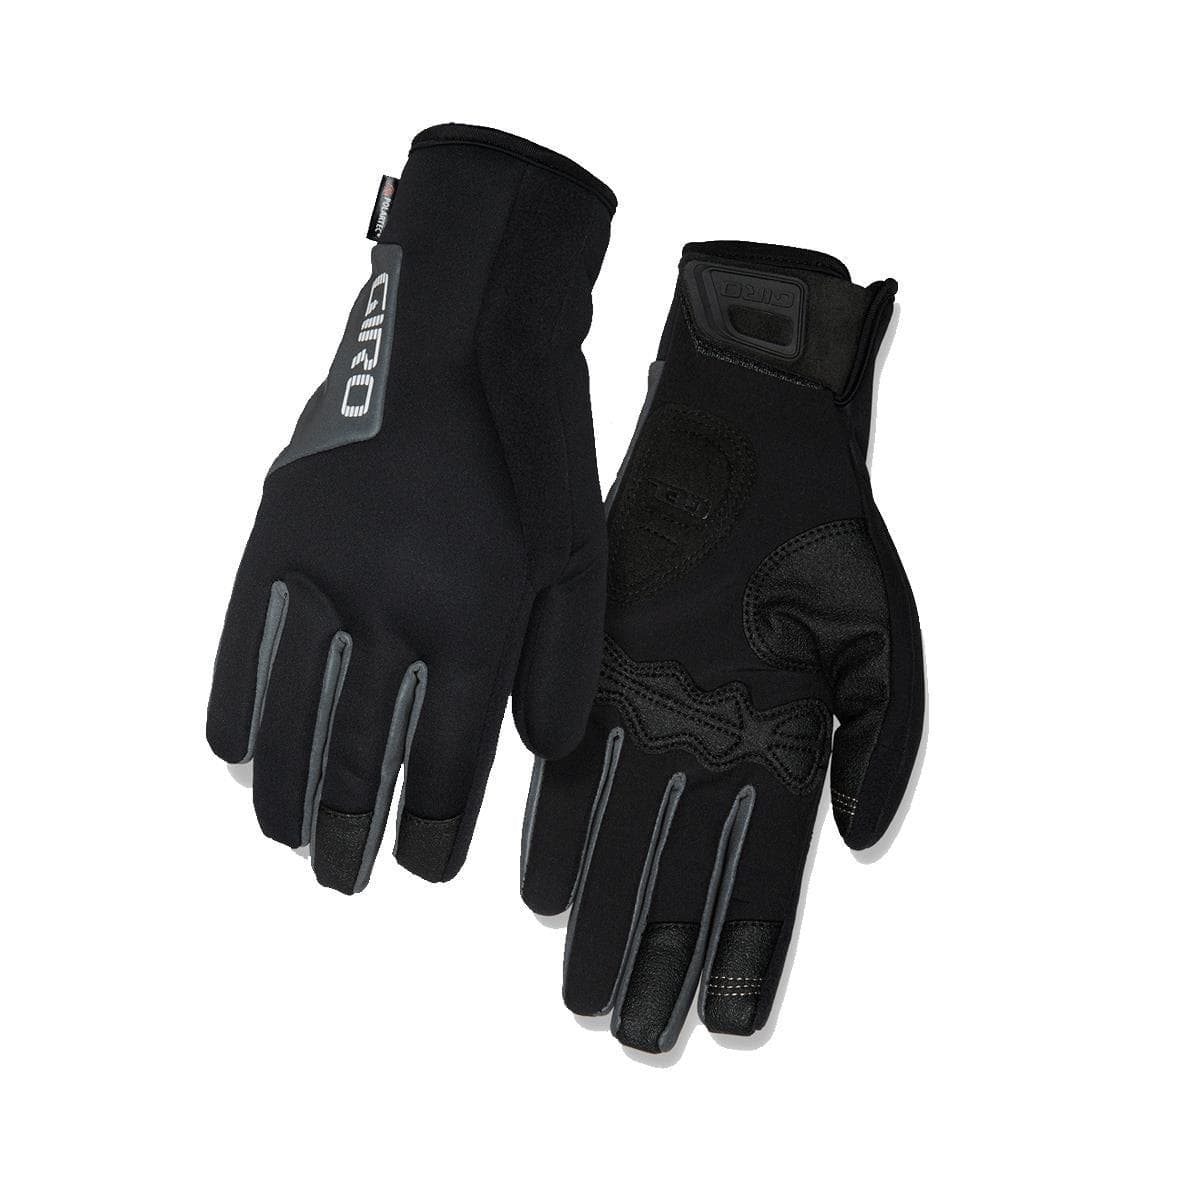 Giro Wm Candela 2.0 Water Resistant Insulated Windbloc Cycling Gloves 2017: Black M